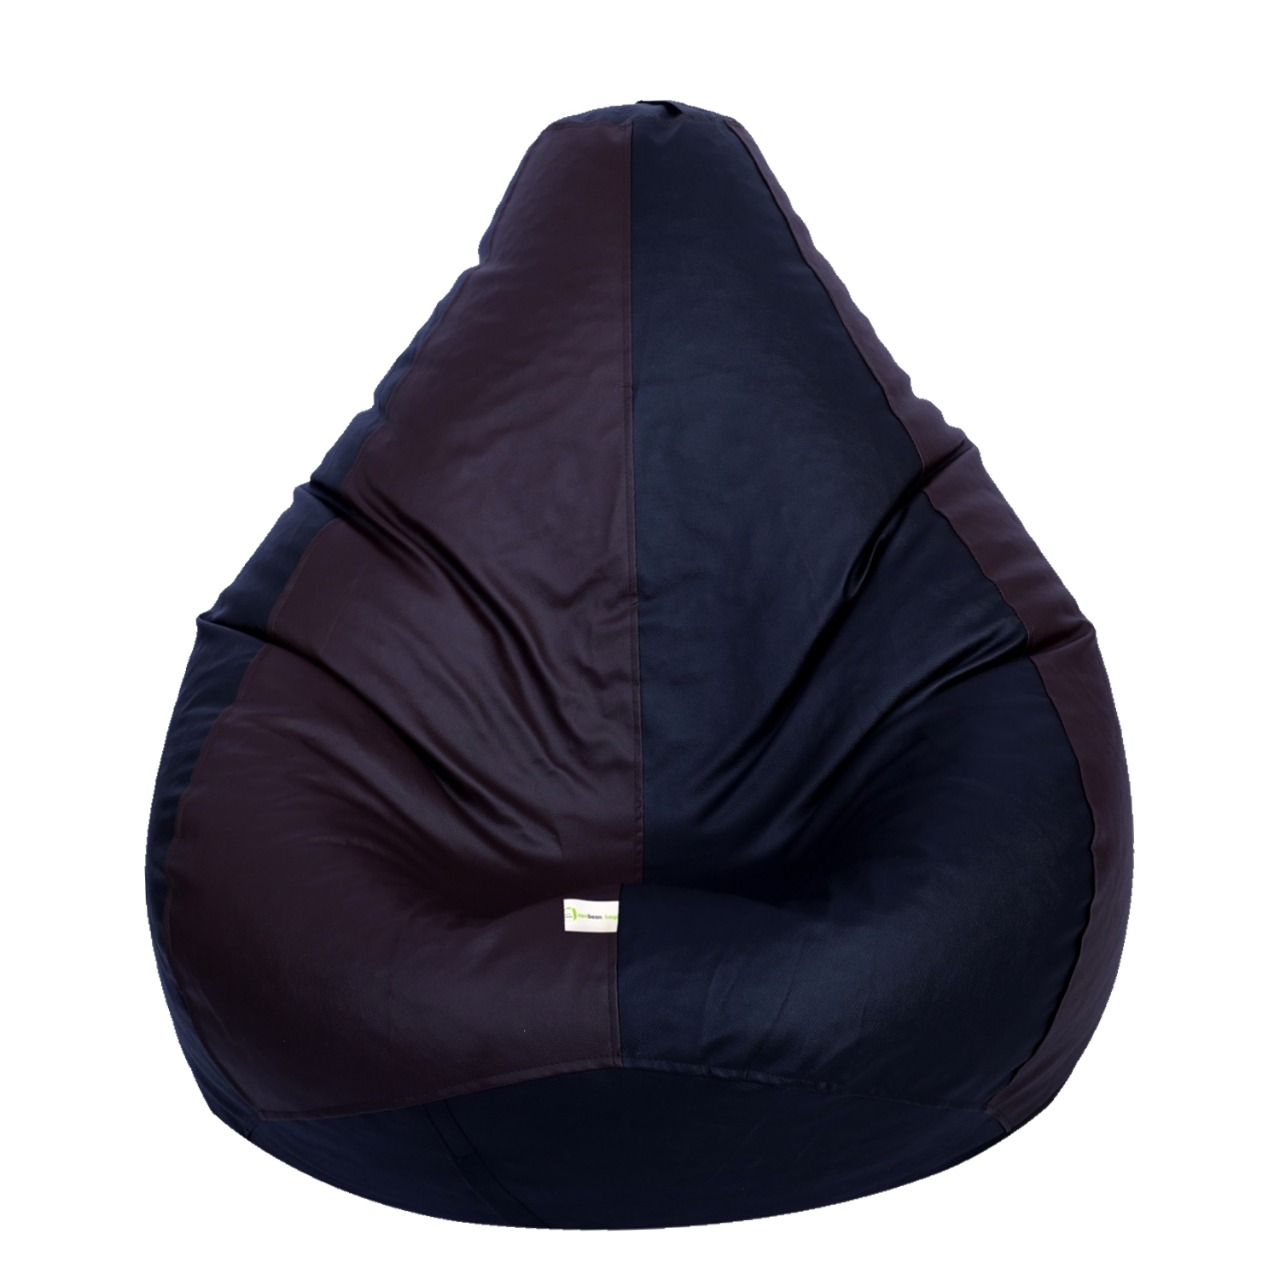  Can Bean Bags Classic Black, Brown With Puffy